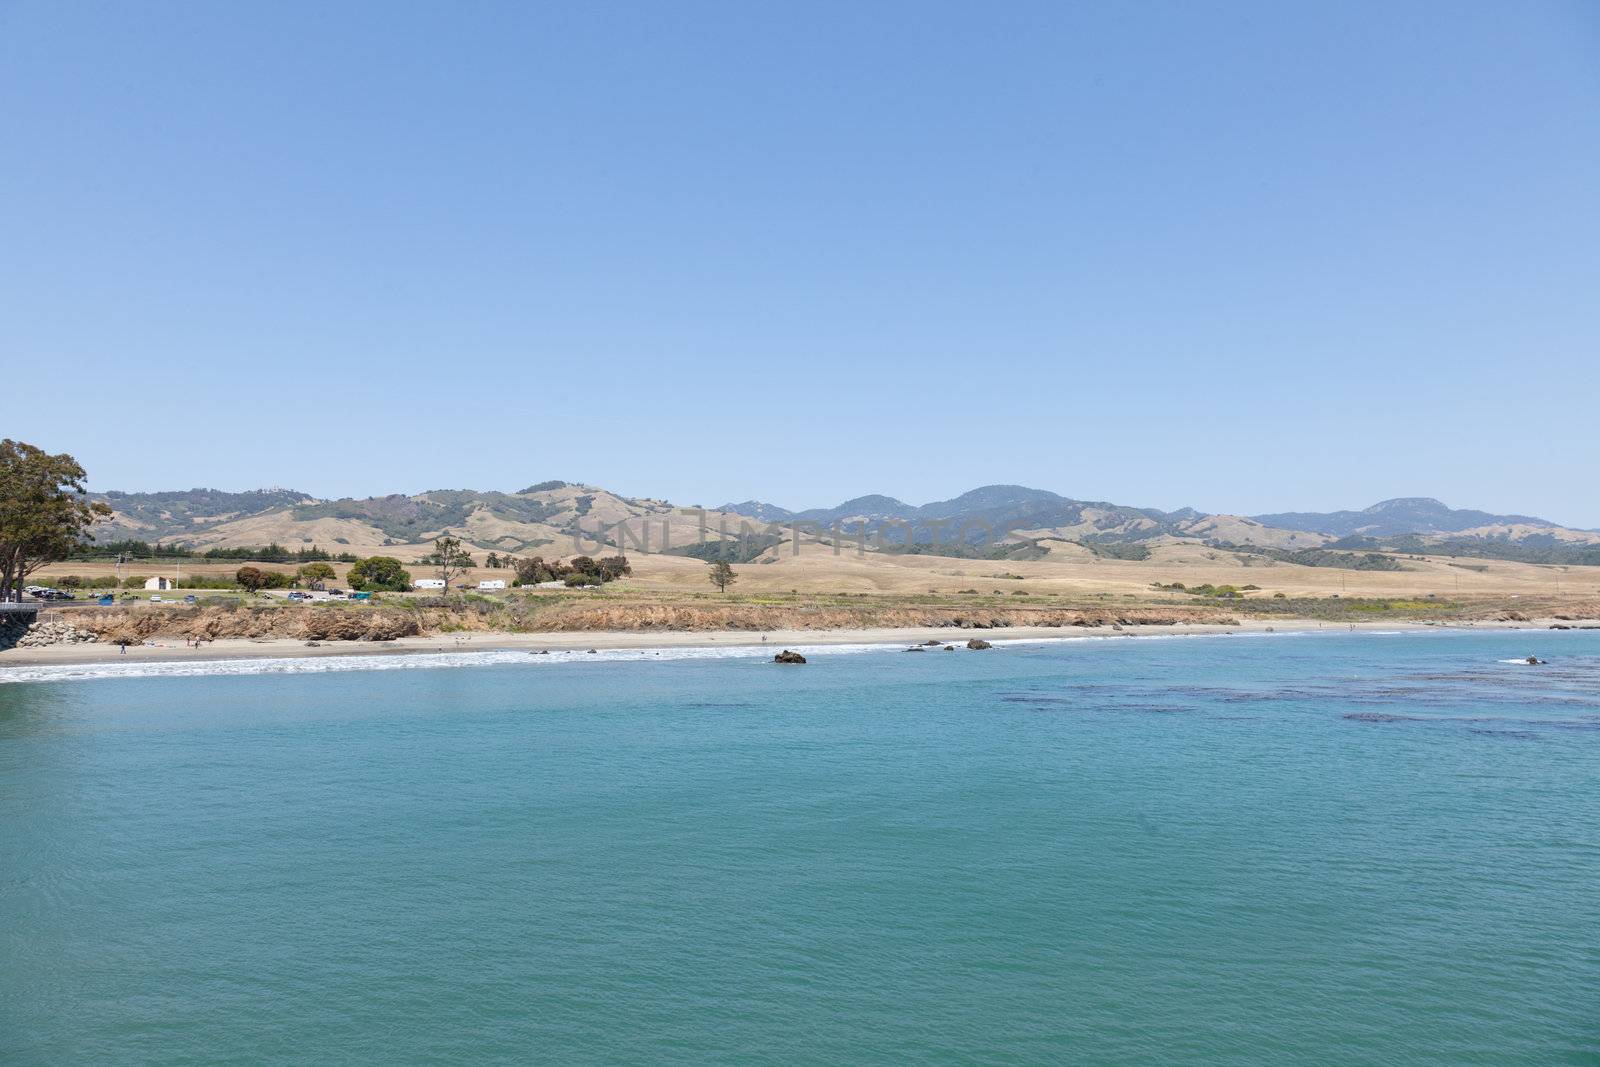 San Simeon State Park is one of the oldest units of the California State Park System. The coastal bluffs and promontories of the scenic park offer unobstructed views of the ocean and rocky shore.